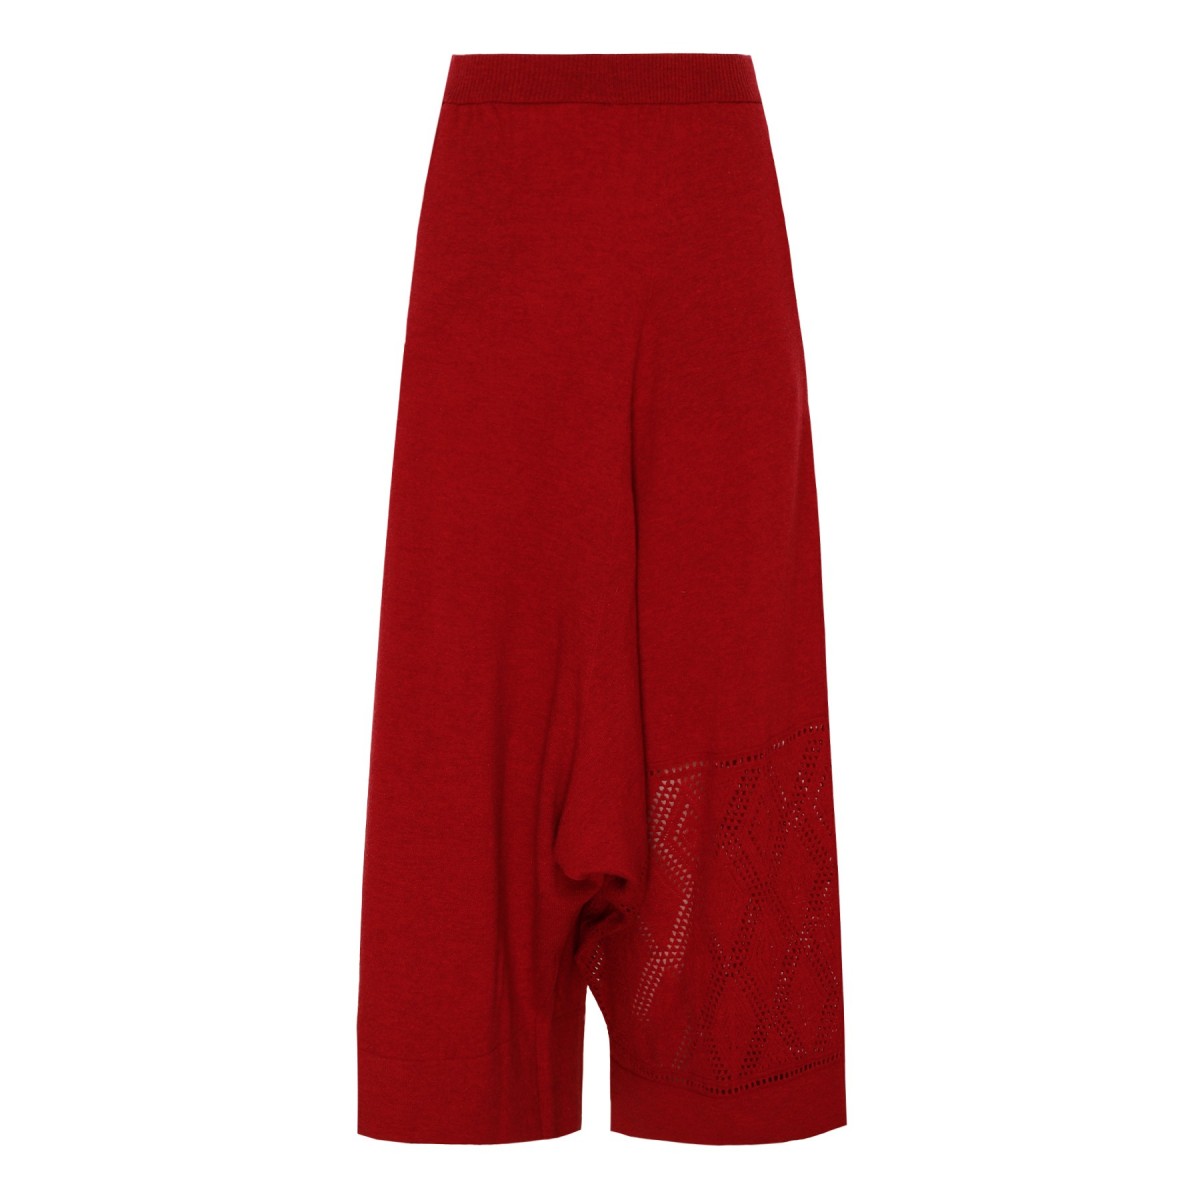 Fire Red Wool Pants